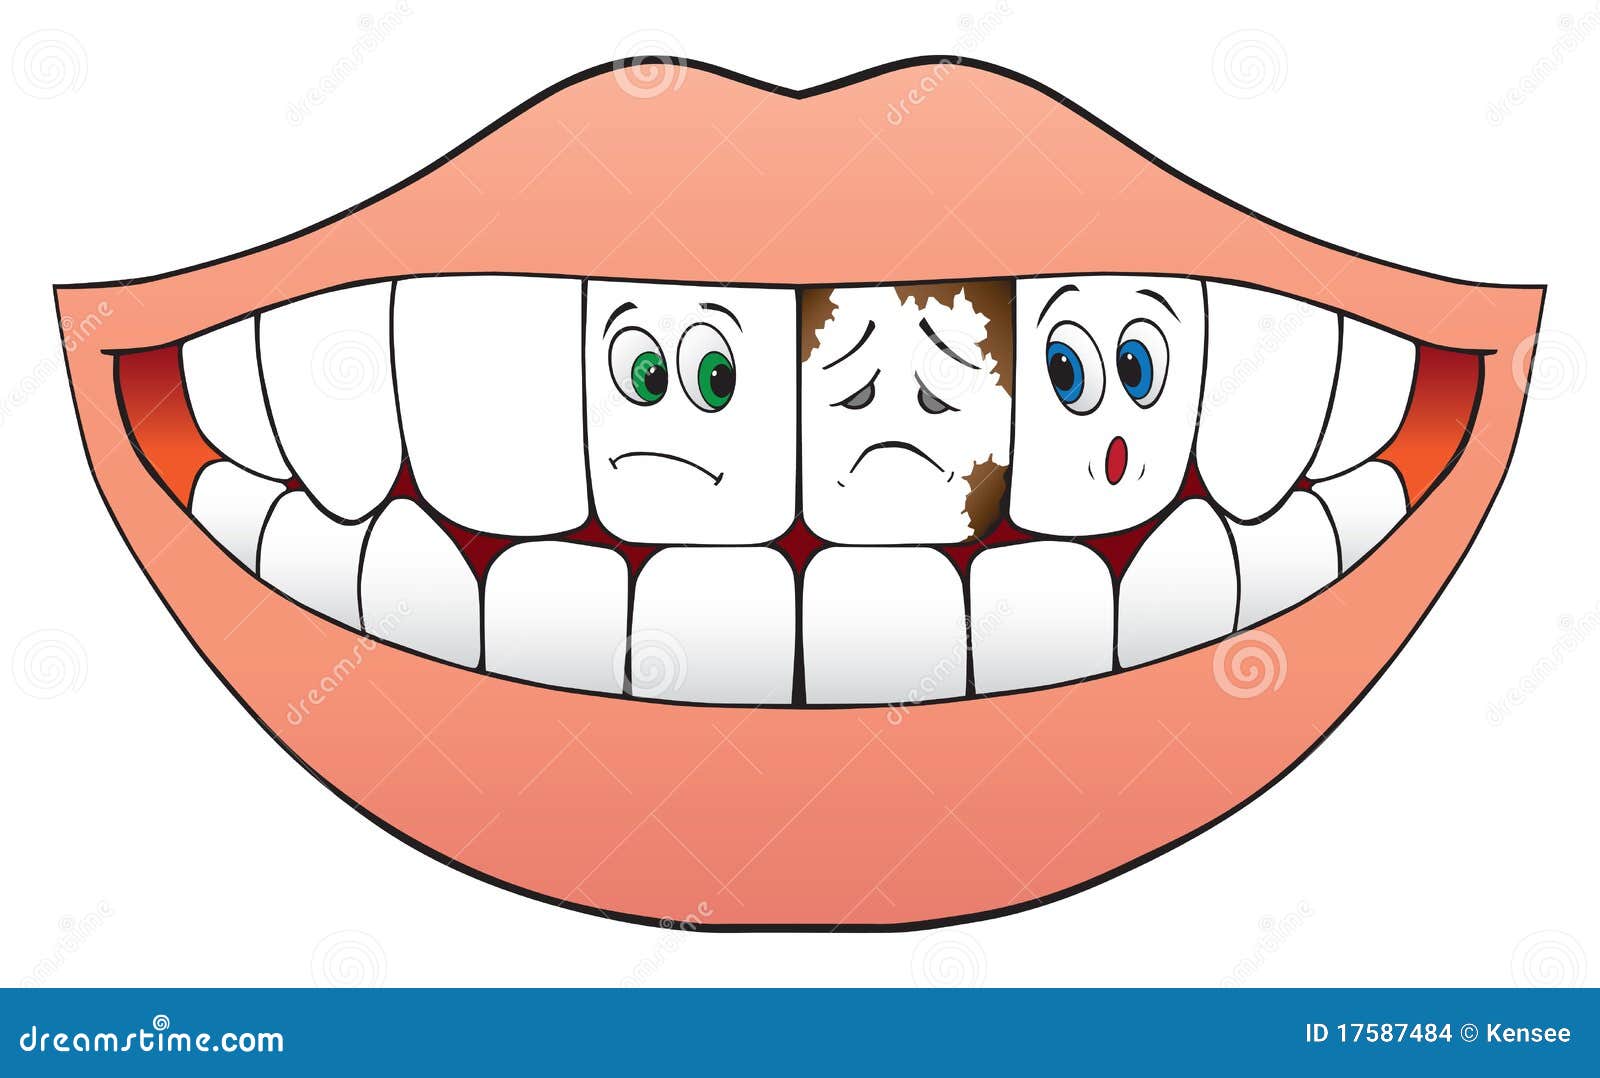 clipart missing tooth - photo #45